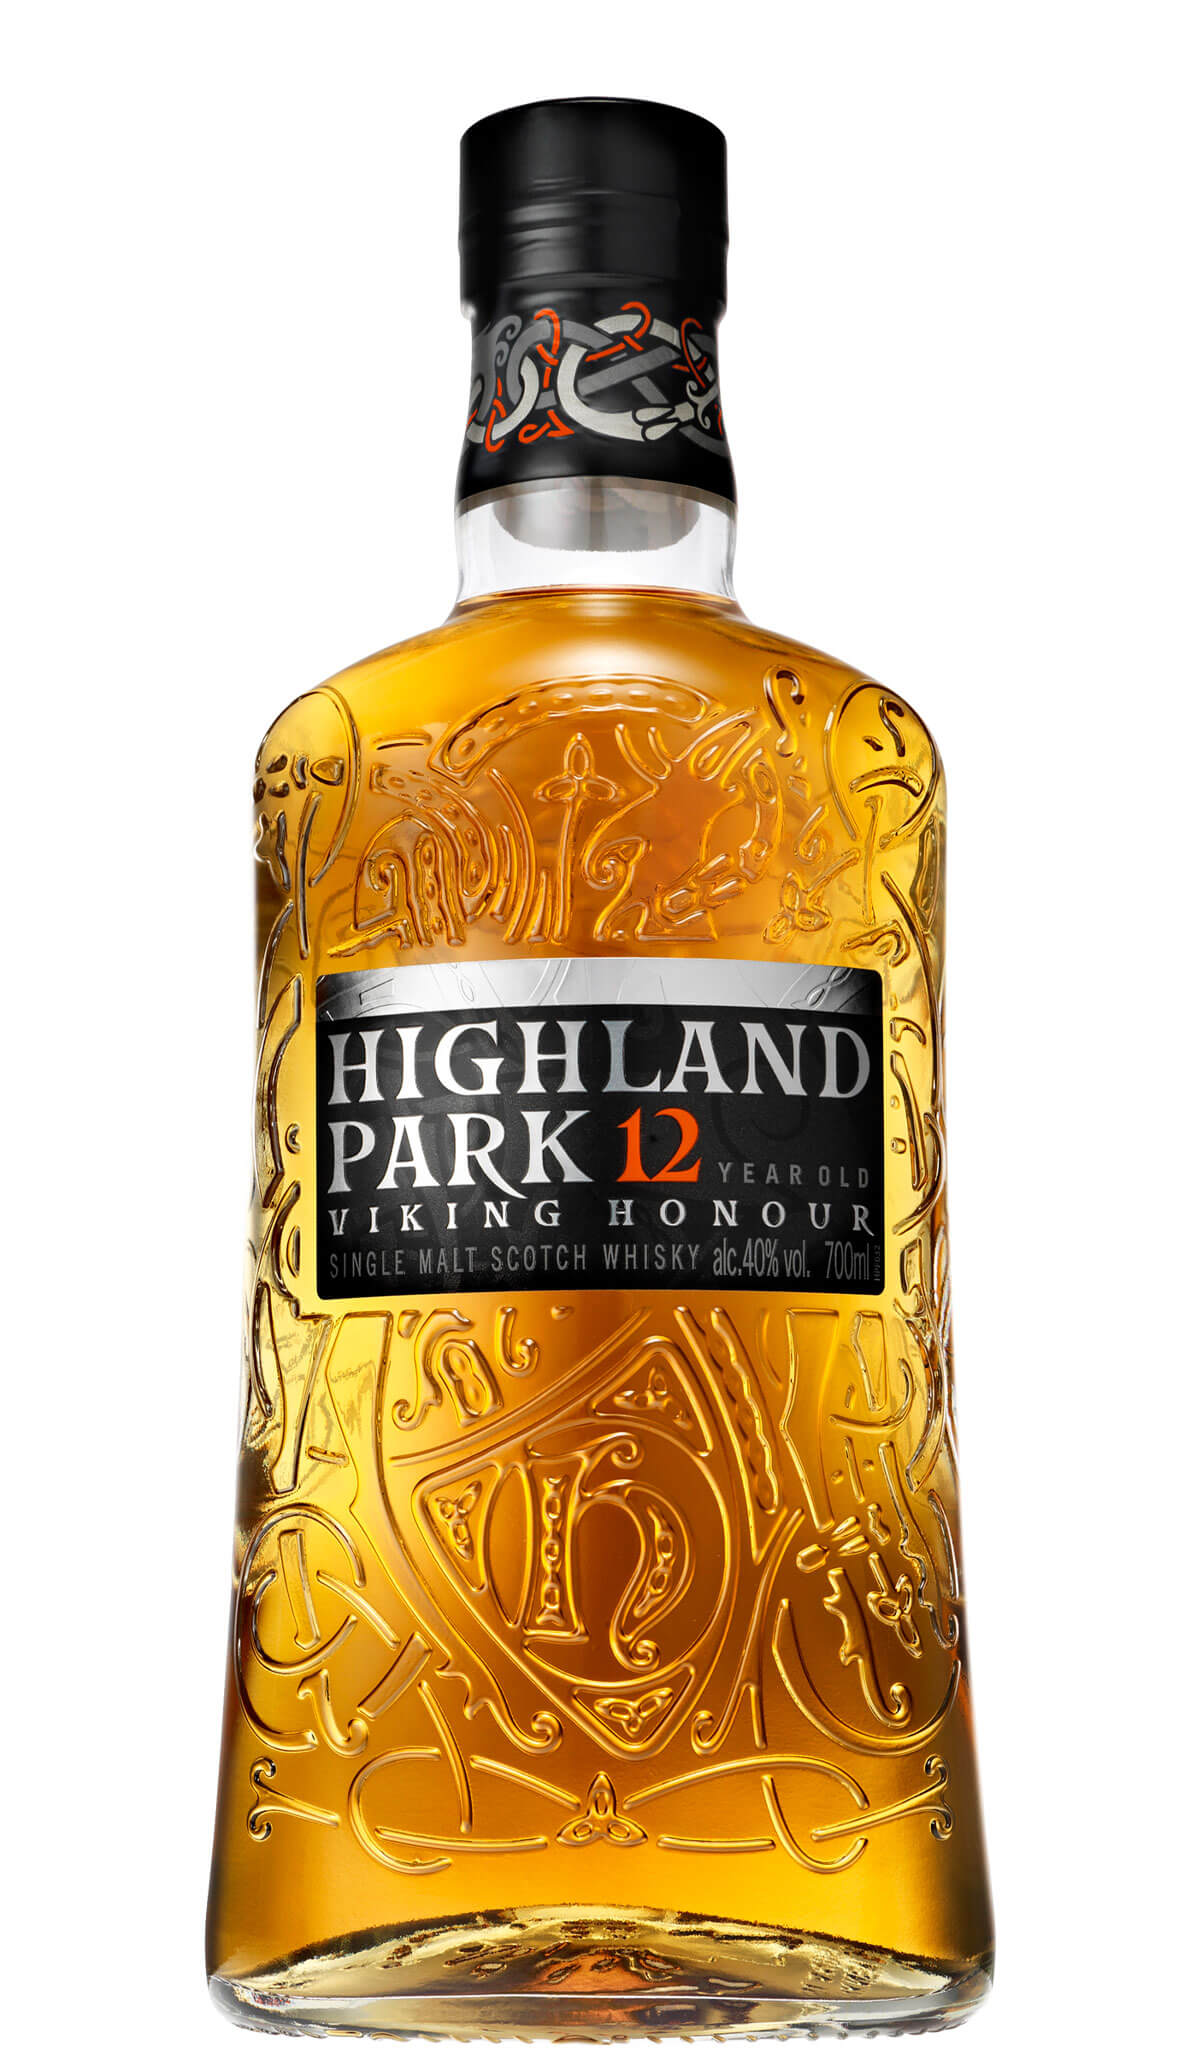 Find out more, explore the range and buy Highland Park 12 Year Old Single Malt Scotch Whisky online at Wine Sellers Direct - Australia's independent liquor specialists.